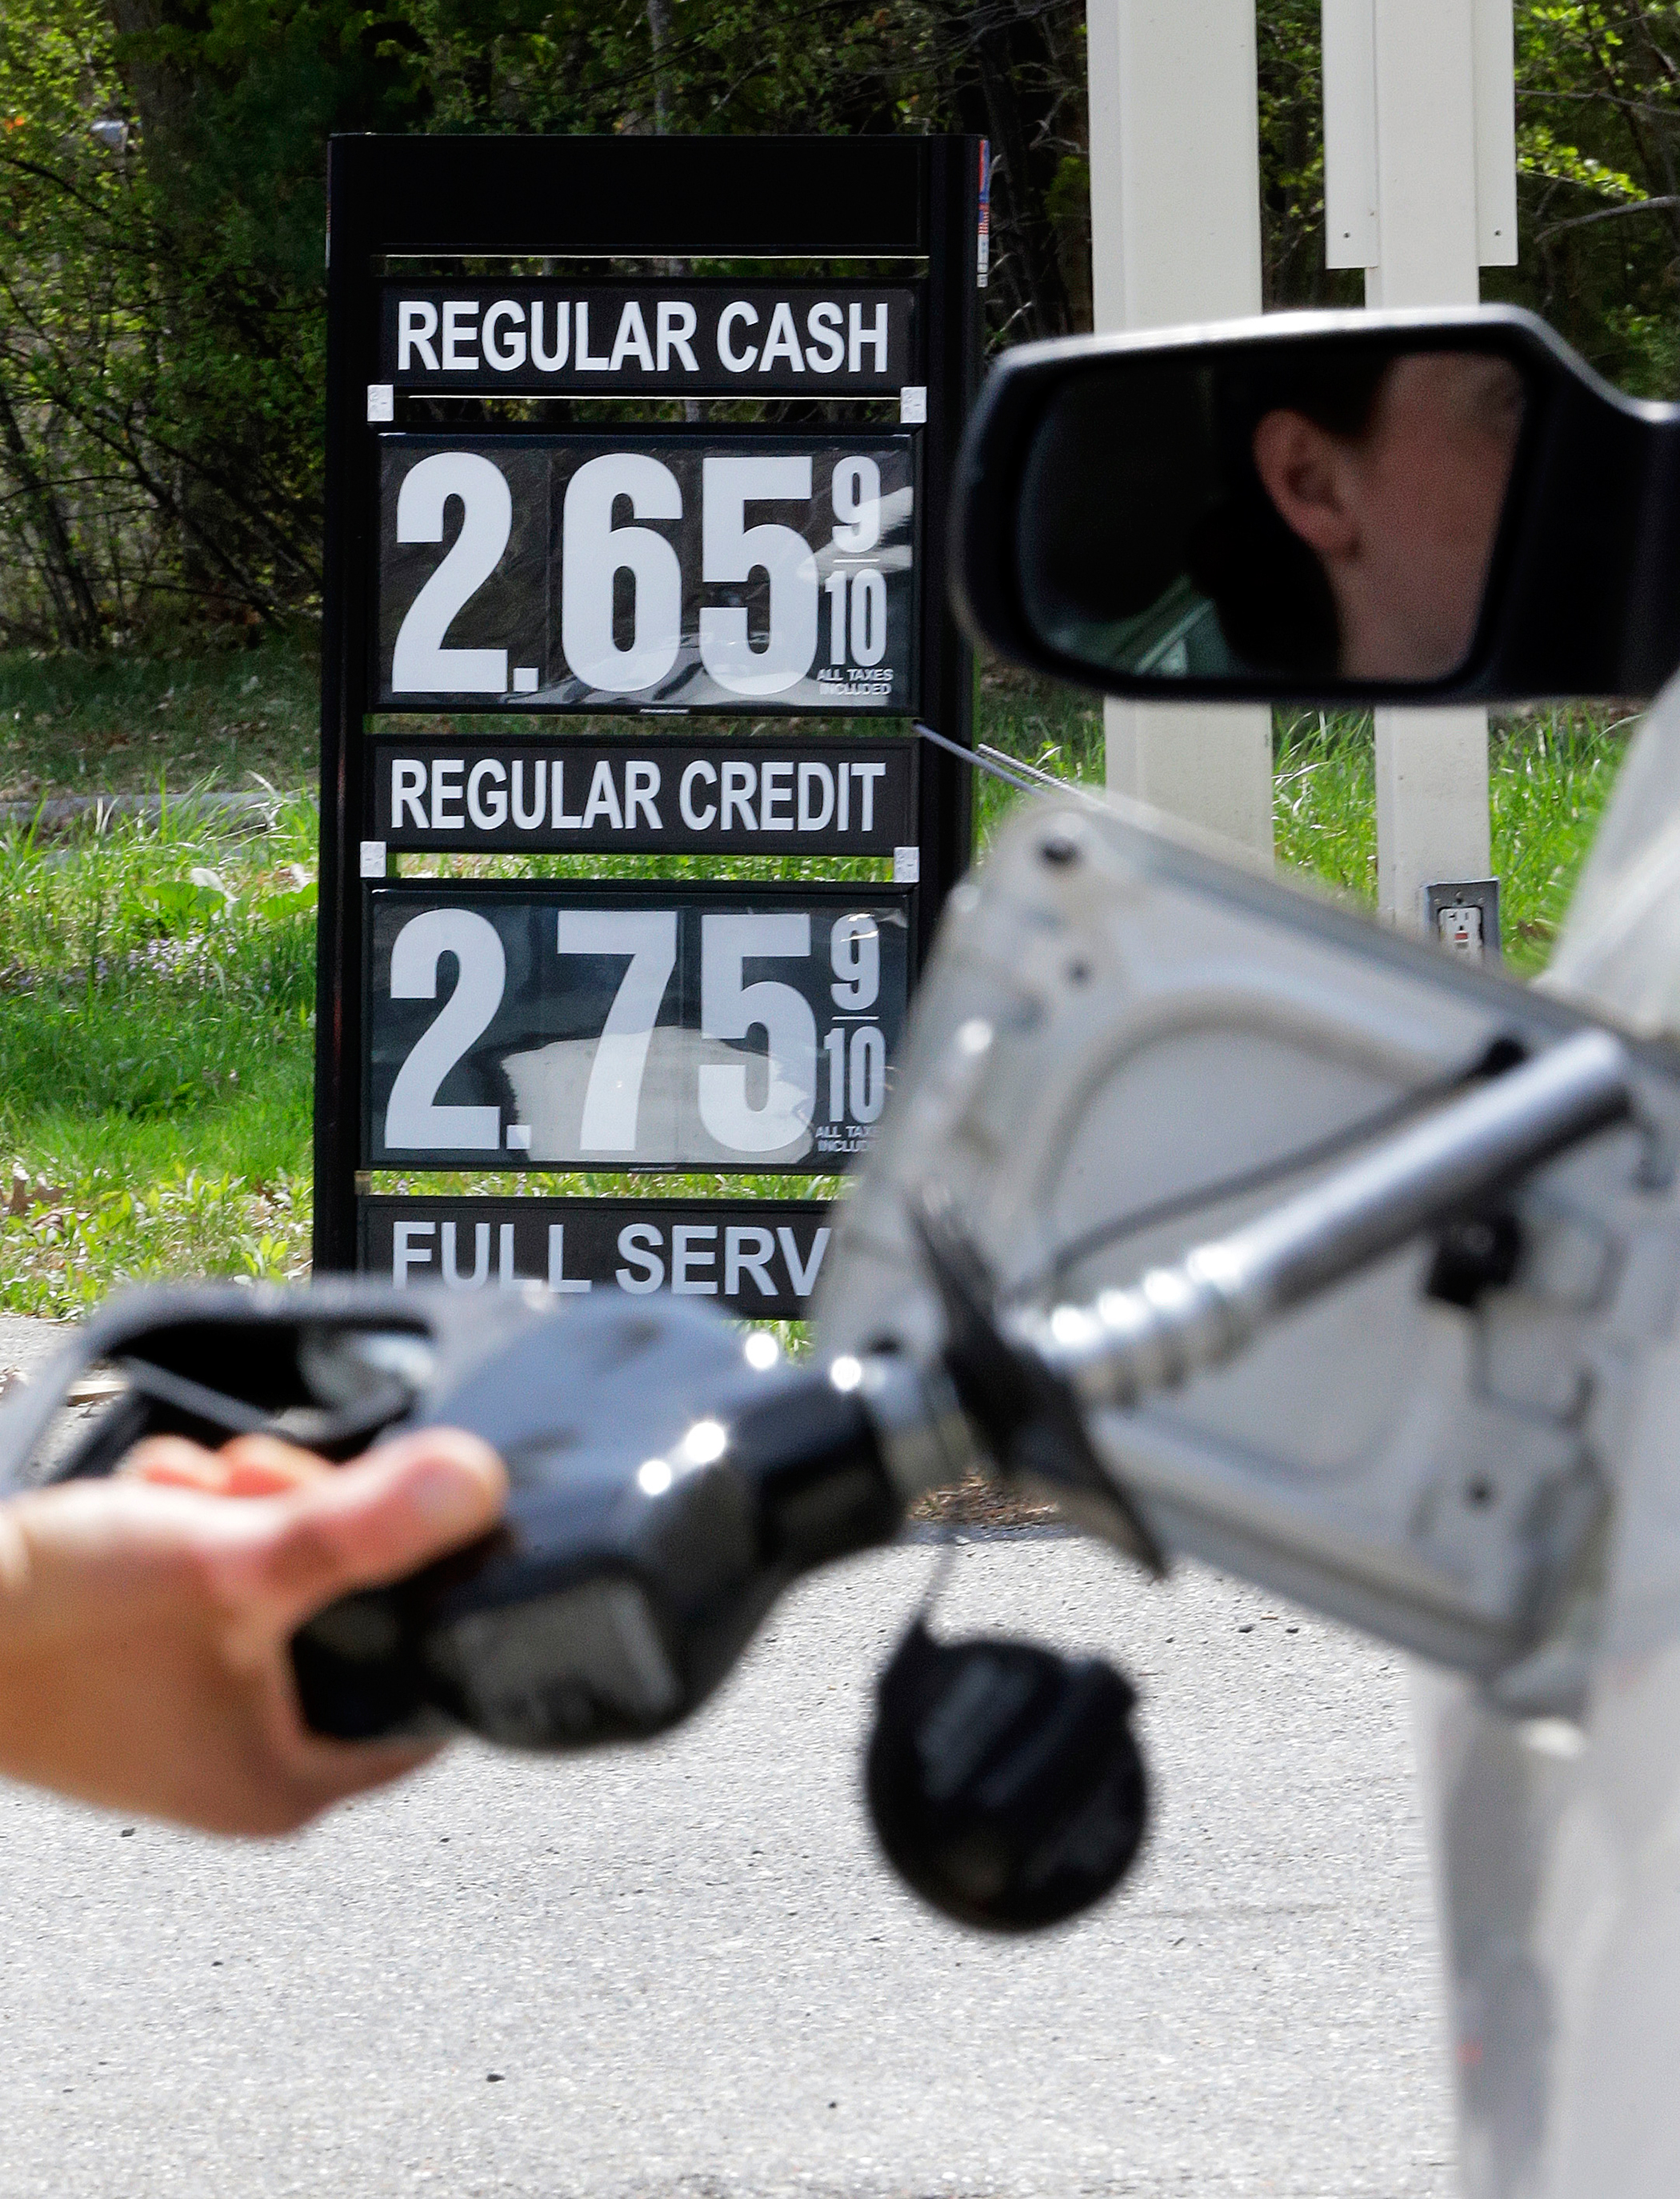 Gas station attendant pumping gas in Andover, Mass., May 8, 2015.